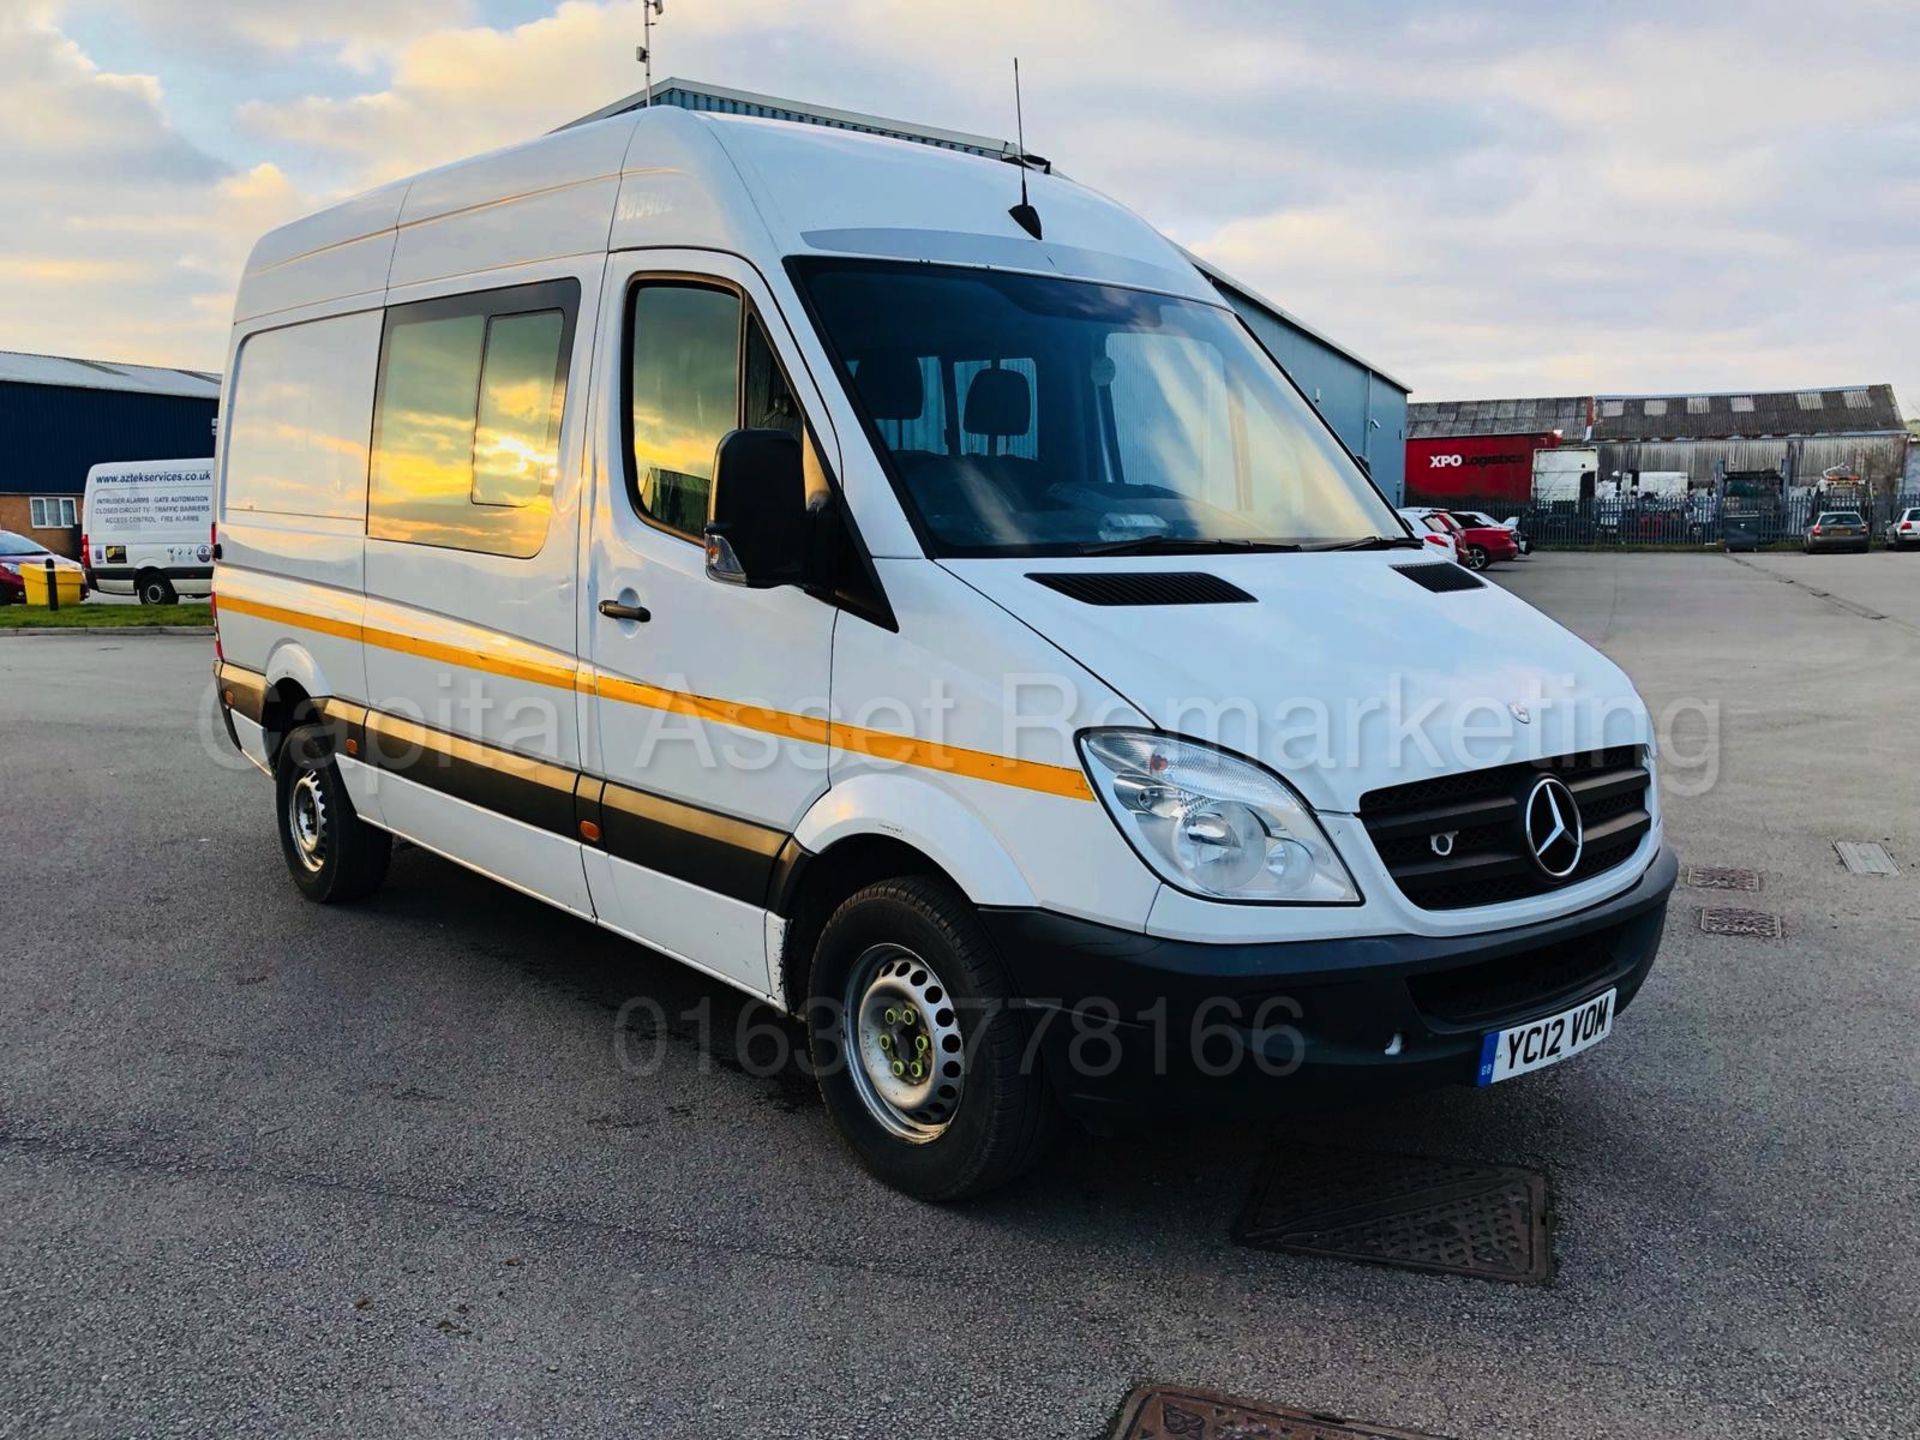 (On Sale) MERCEDES-BENZ SPRINTER 313 CDI 'MWB HI-ROOF' 7 SEATER (2012) '130 BHP - 6 SPEED' - Image 11 of 23